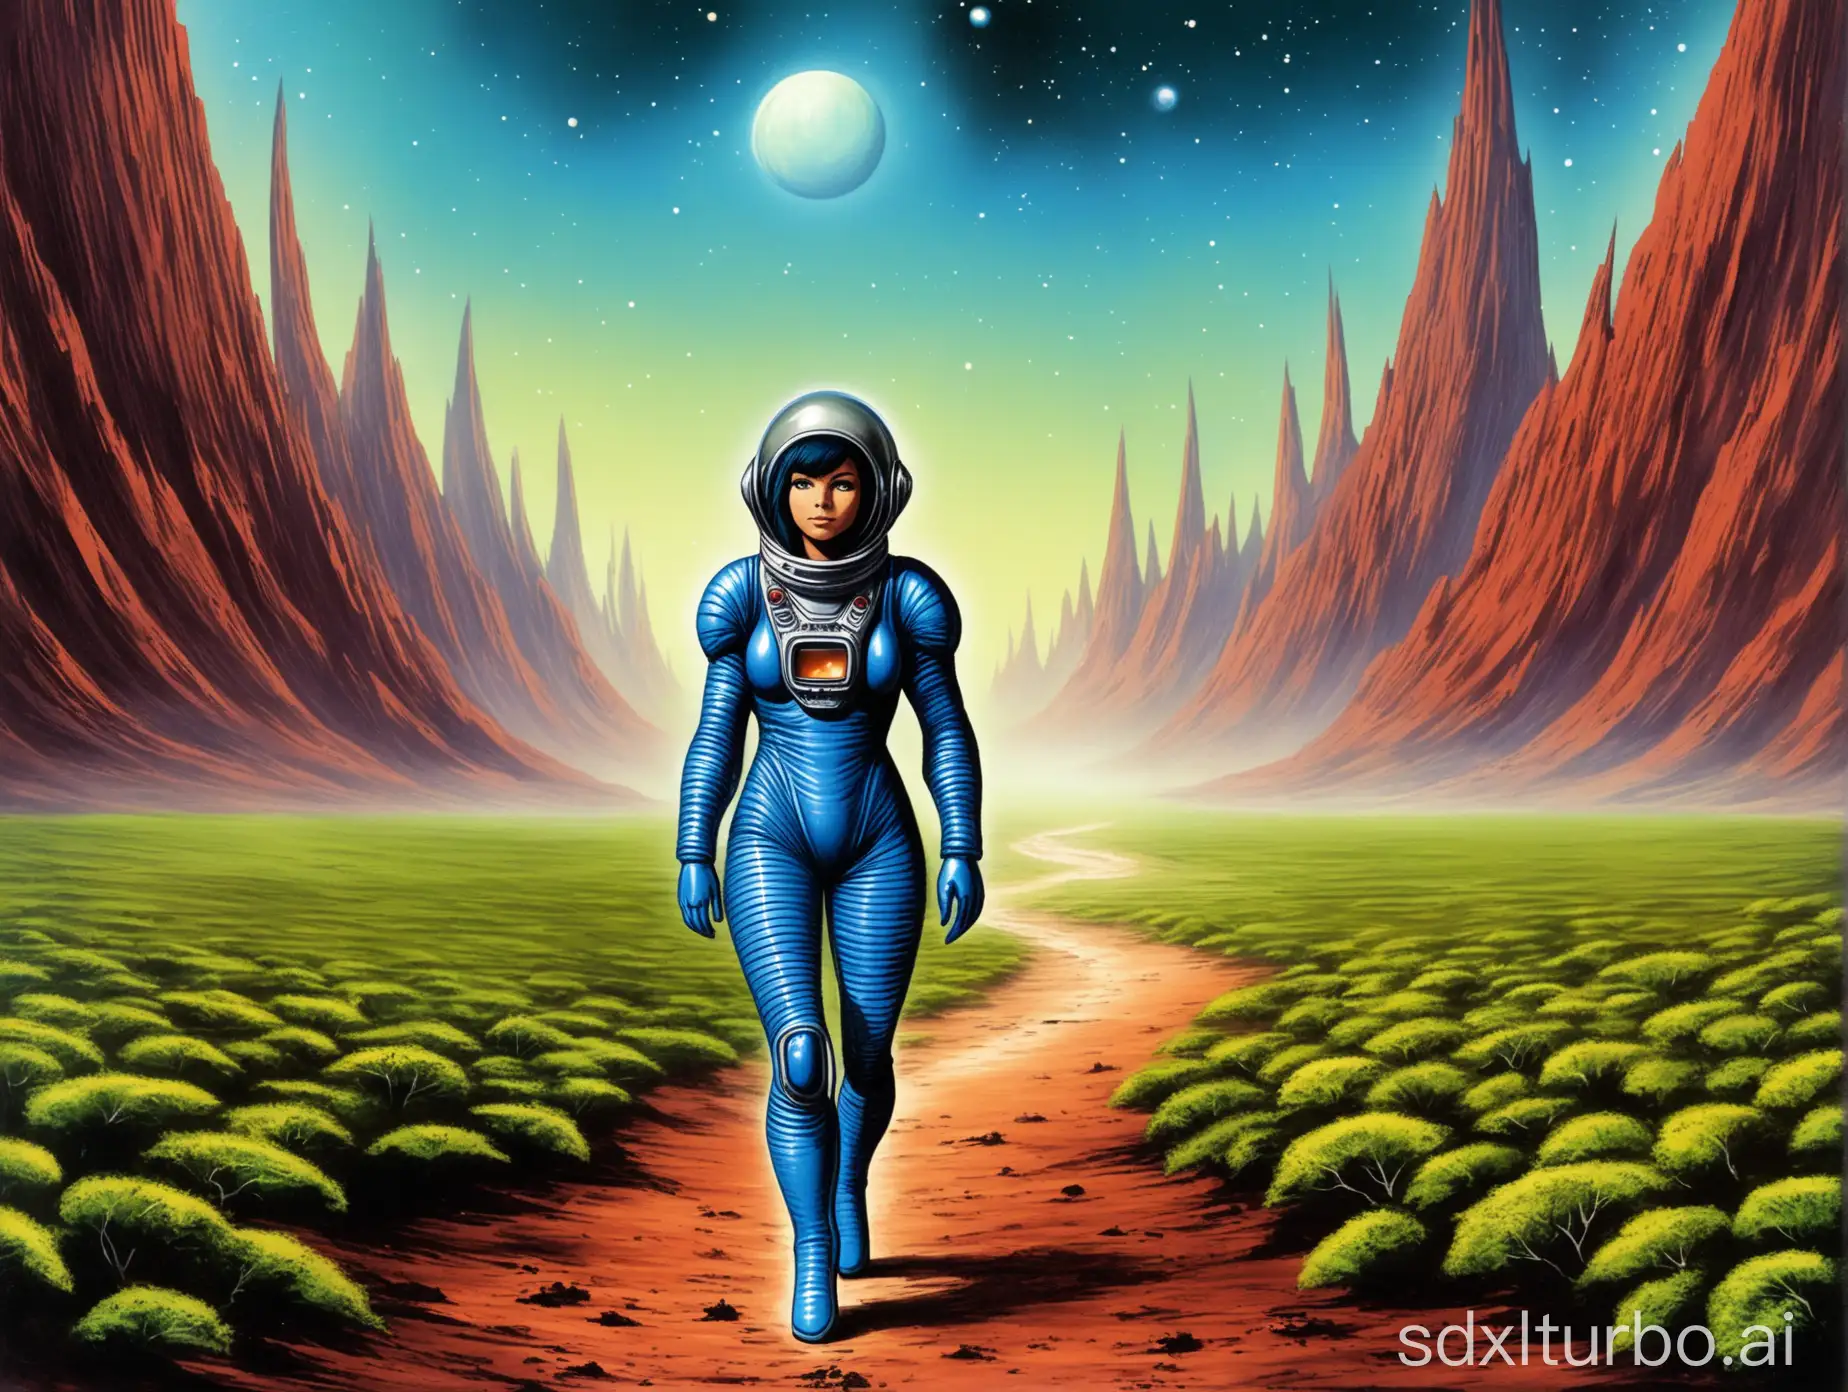 Mirona-Thetin-from-Perry-Rhodan-in-Space-Suit-Explores-Alien-Landscape